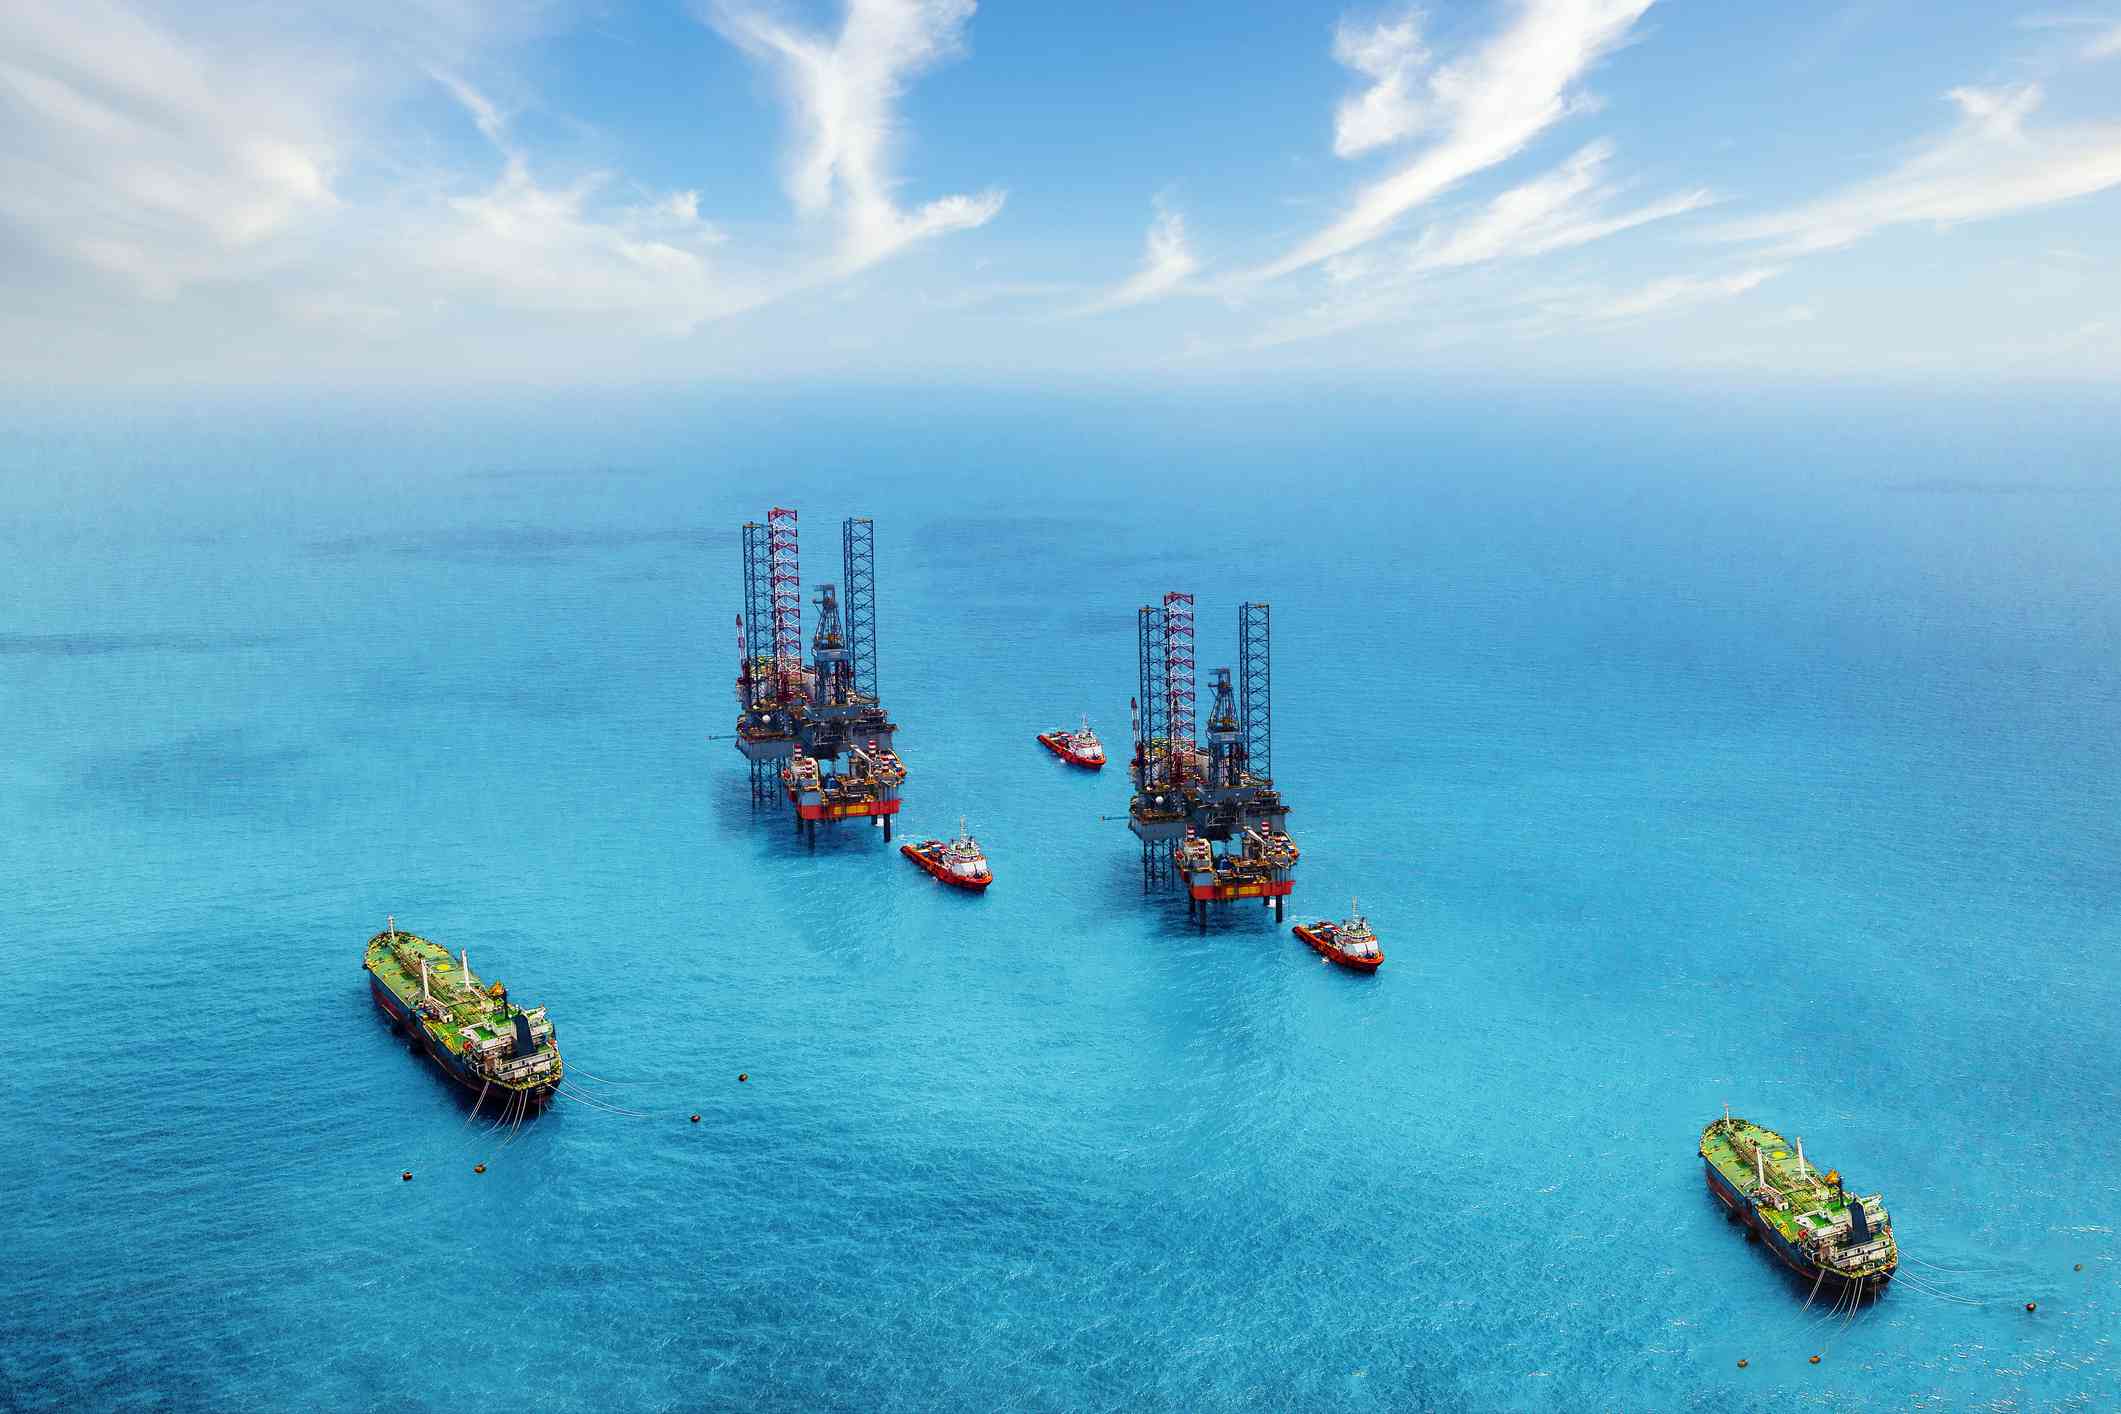 Aerial view of two oil rigs in the ocean surrounded by ships